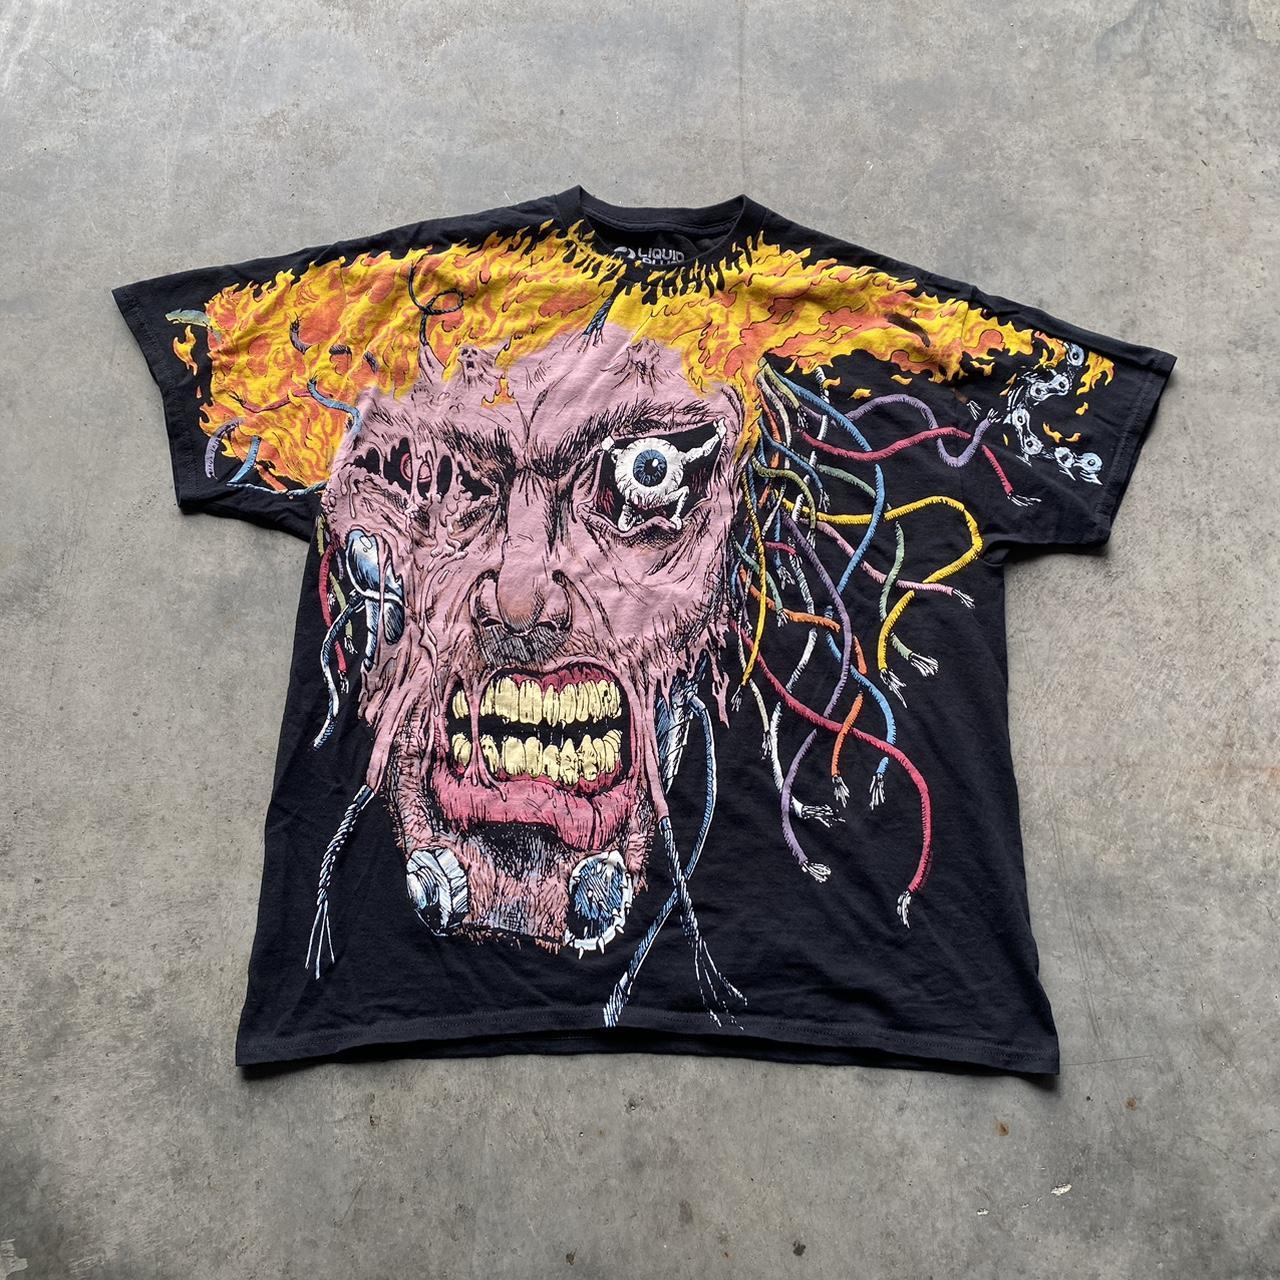 item listed by madmanclothing